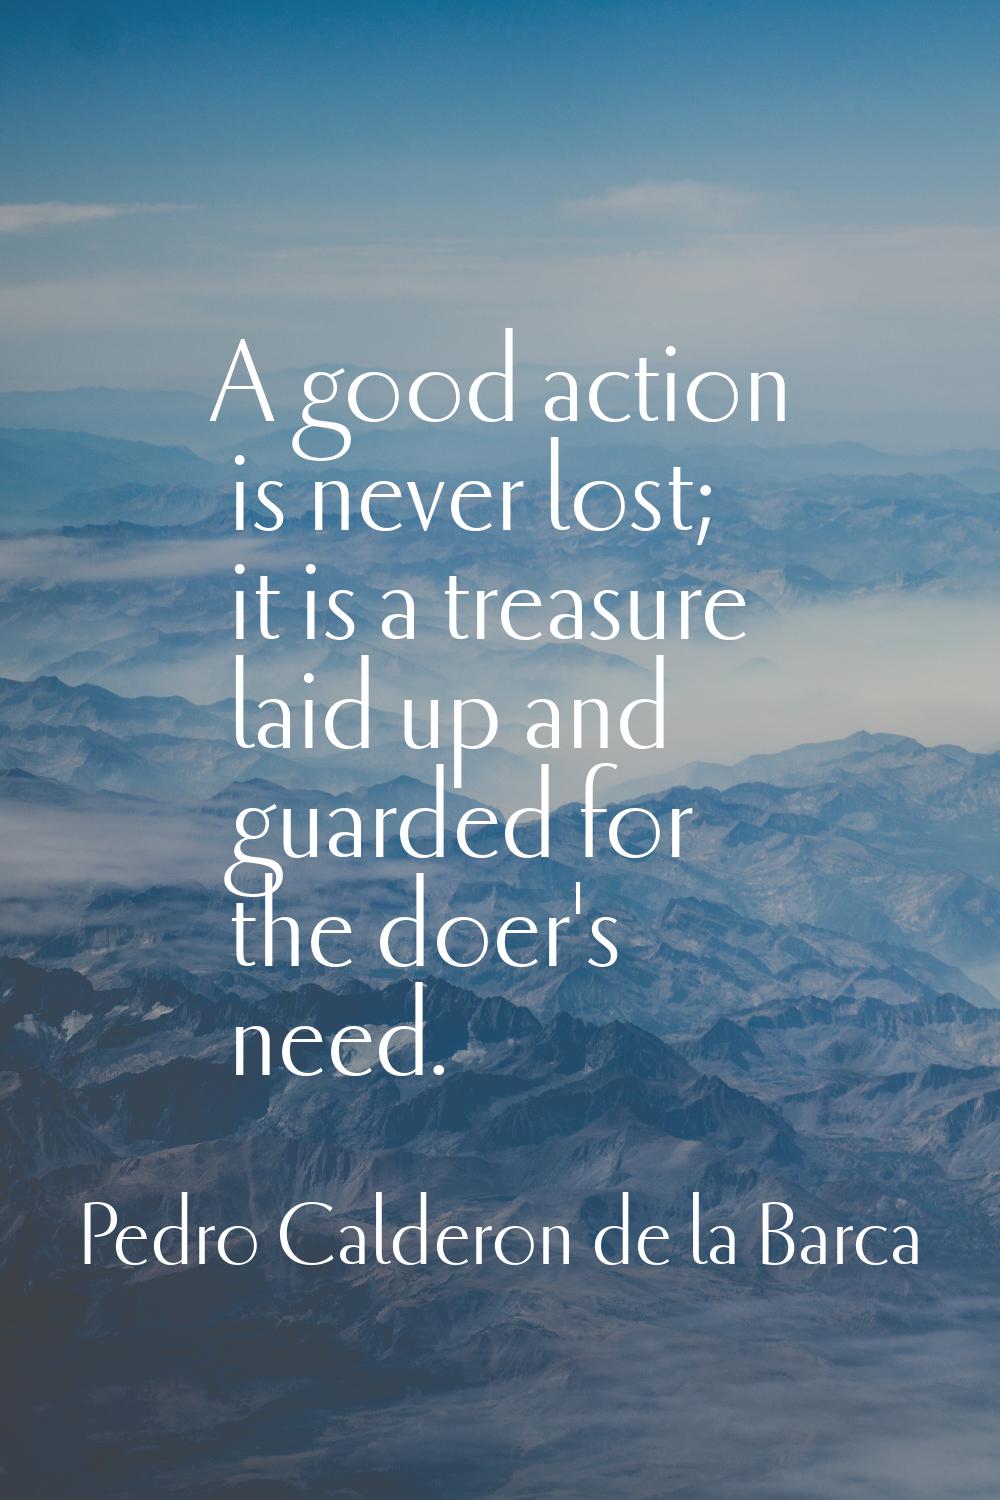 A good action is never lost; it is a treasure laid up and guarded for the doer's need.